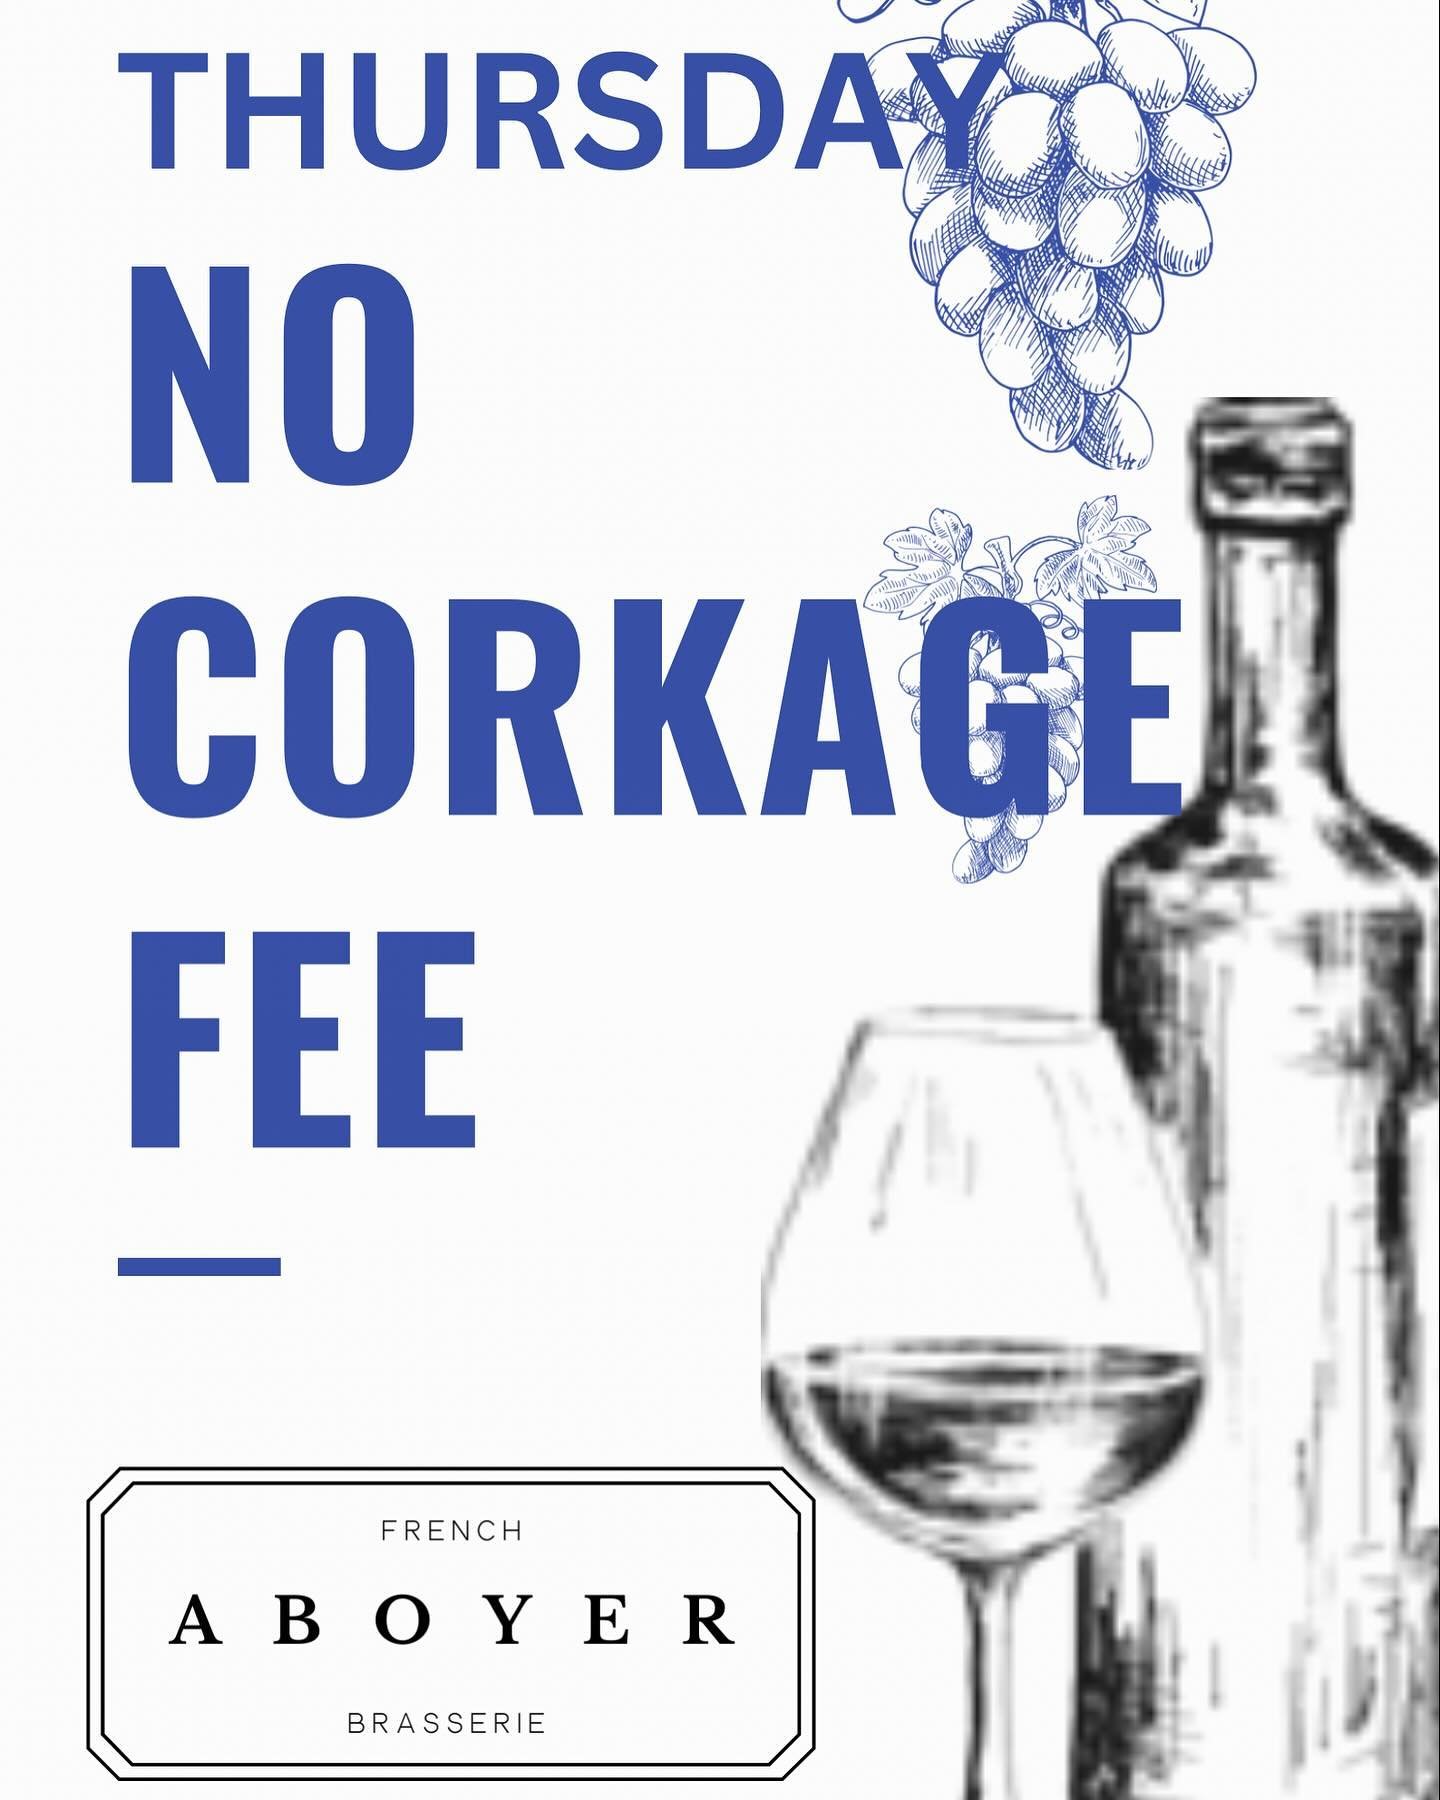 Pull that wine from your cellar and hang up that apron- let us do the cooking tonight! No Corkage Fee Thursday is back!!!!! #parisinyourbackyard #aboyer #patio #frenchcuisine